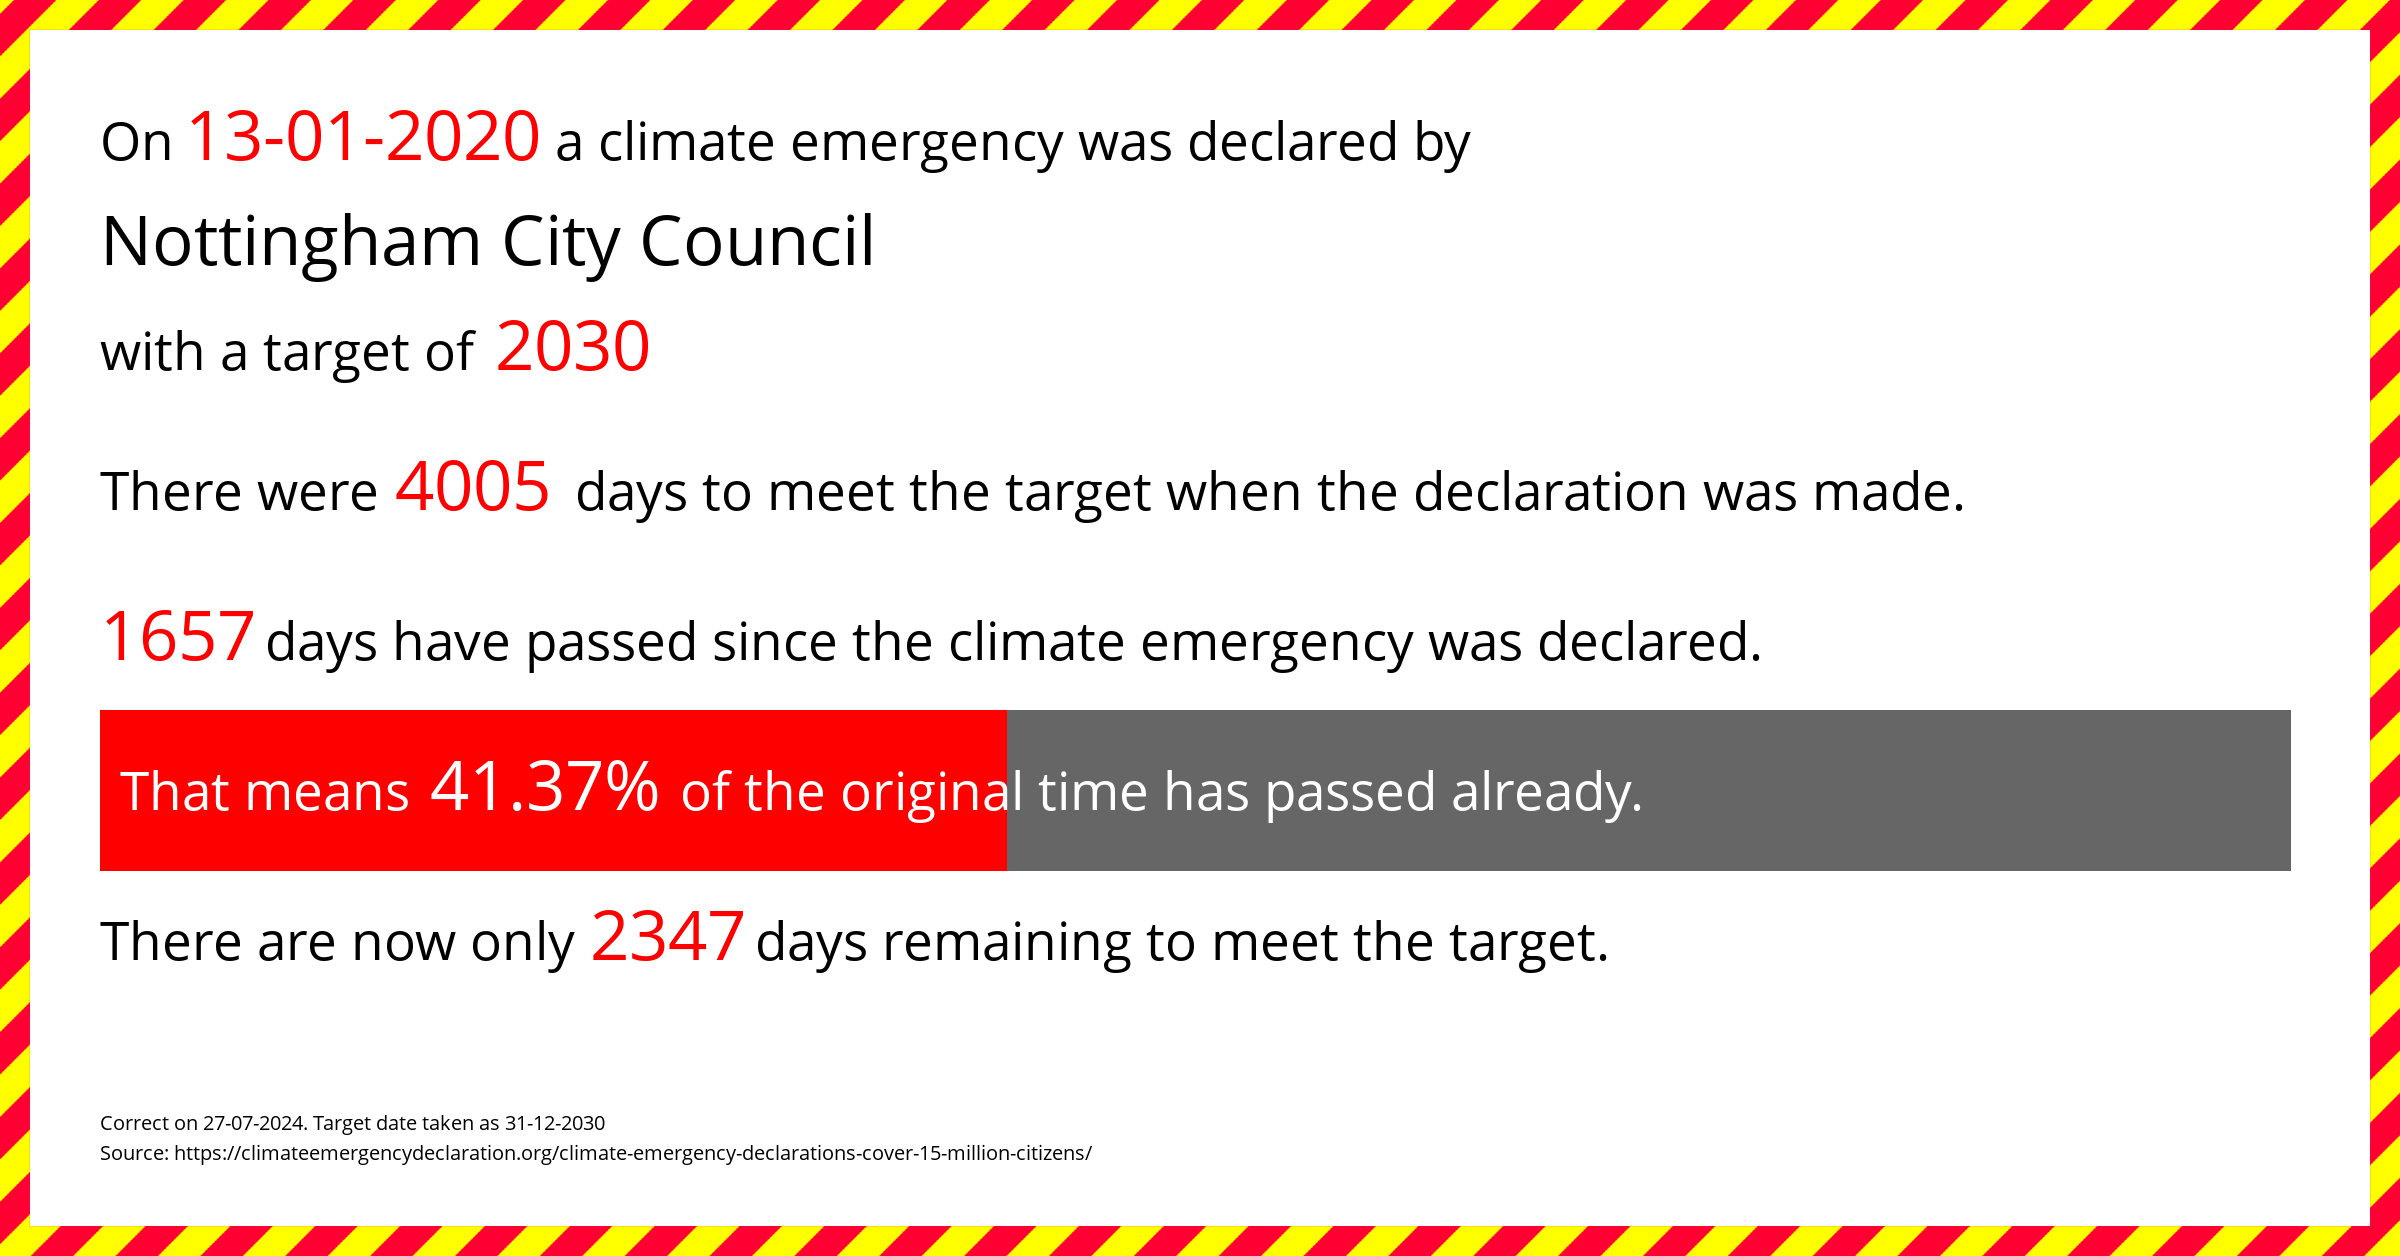 Nottingham City Council declared a Climate emergency on Monday 13th January 2020, with a target of 2030.